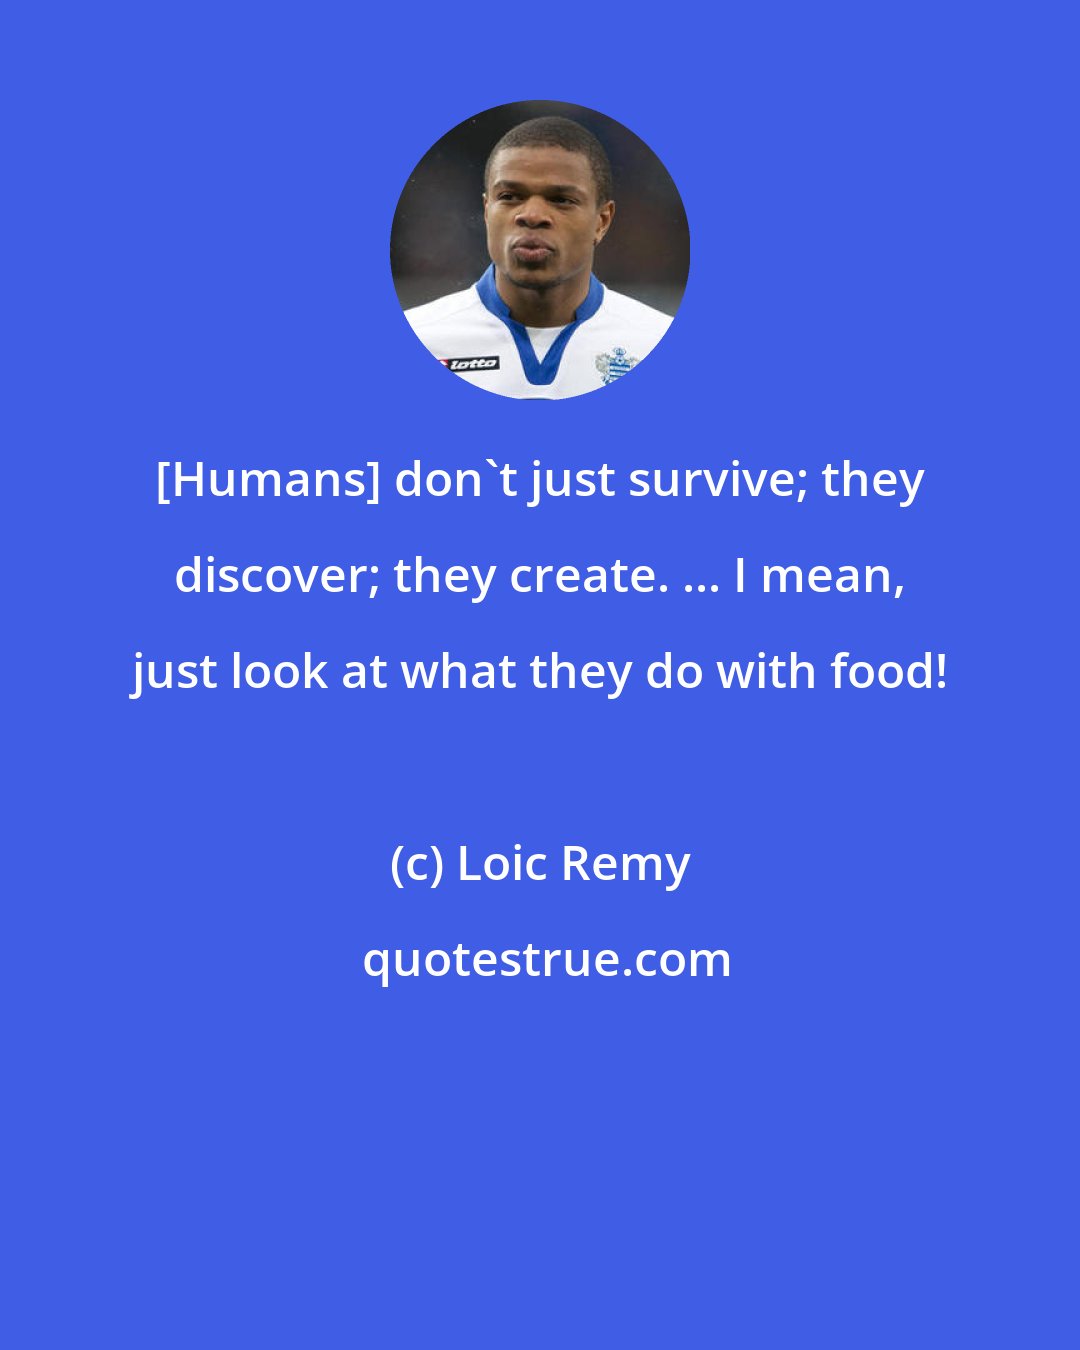 Loic Remy: [Humans] don't just survive; they discover; they create. ... I mean, just look at what they do with food!